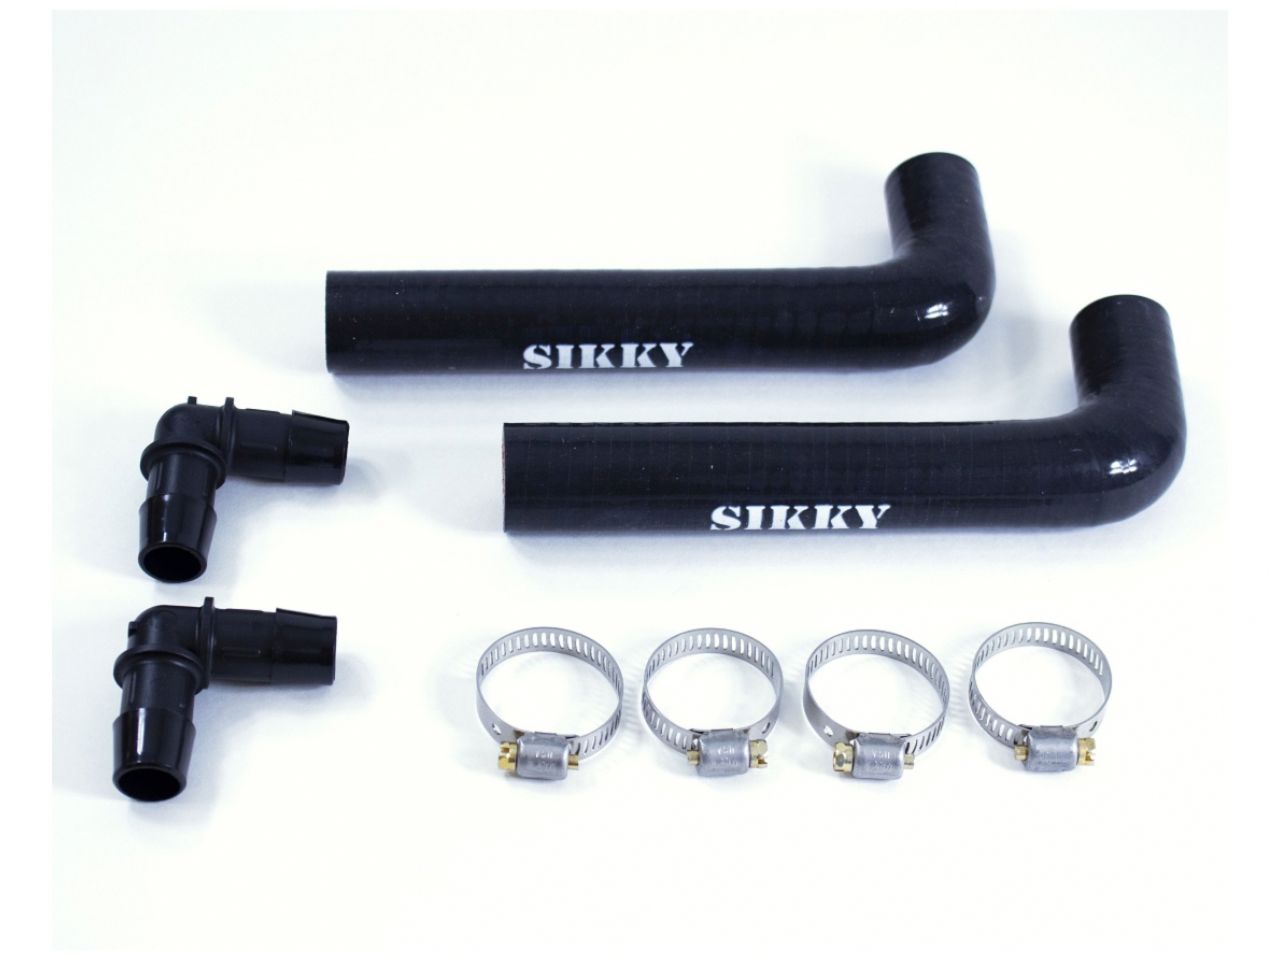 Sikky Vehicle Parts HK001 Item Image